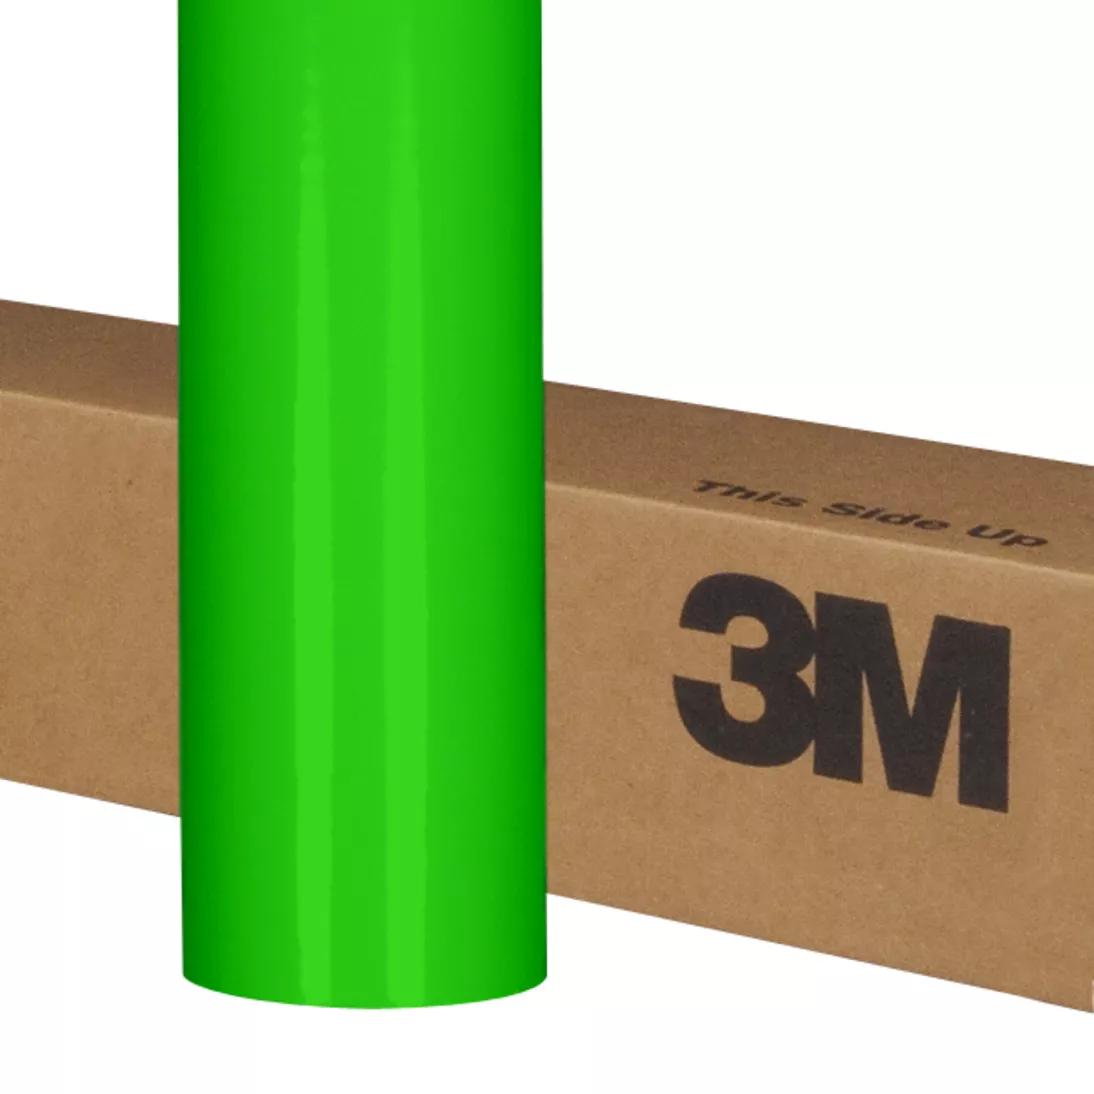 3M™ Scotchcal™ Translucent Graphic Film 3630-5415, Green, 48 in x 50 yd